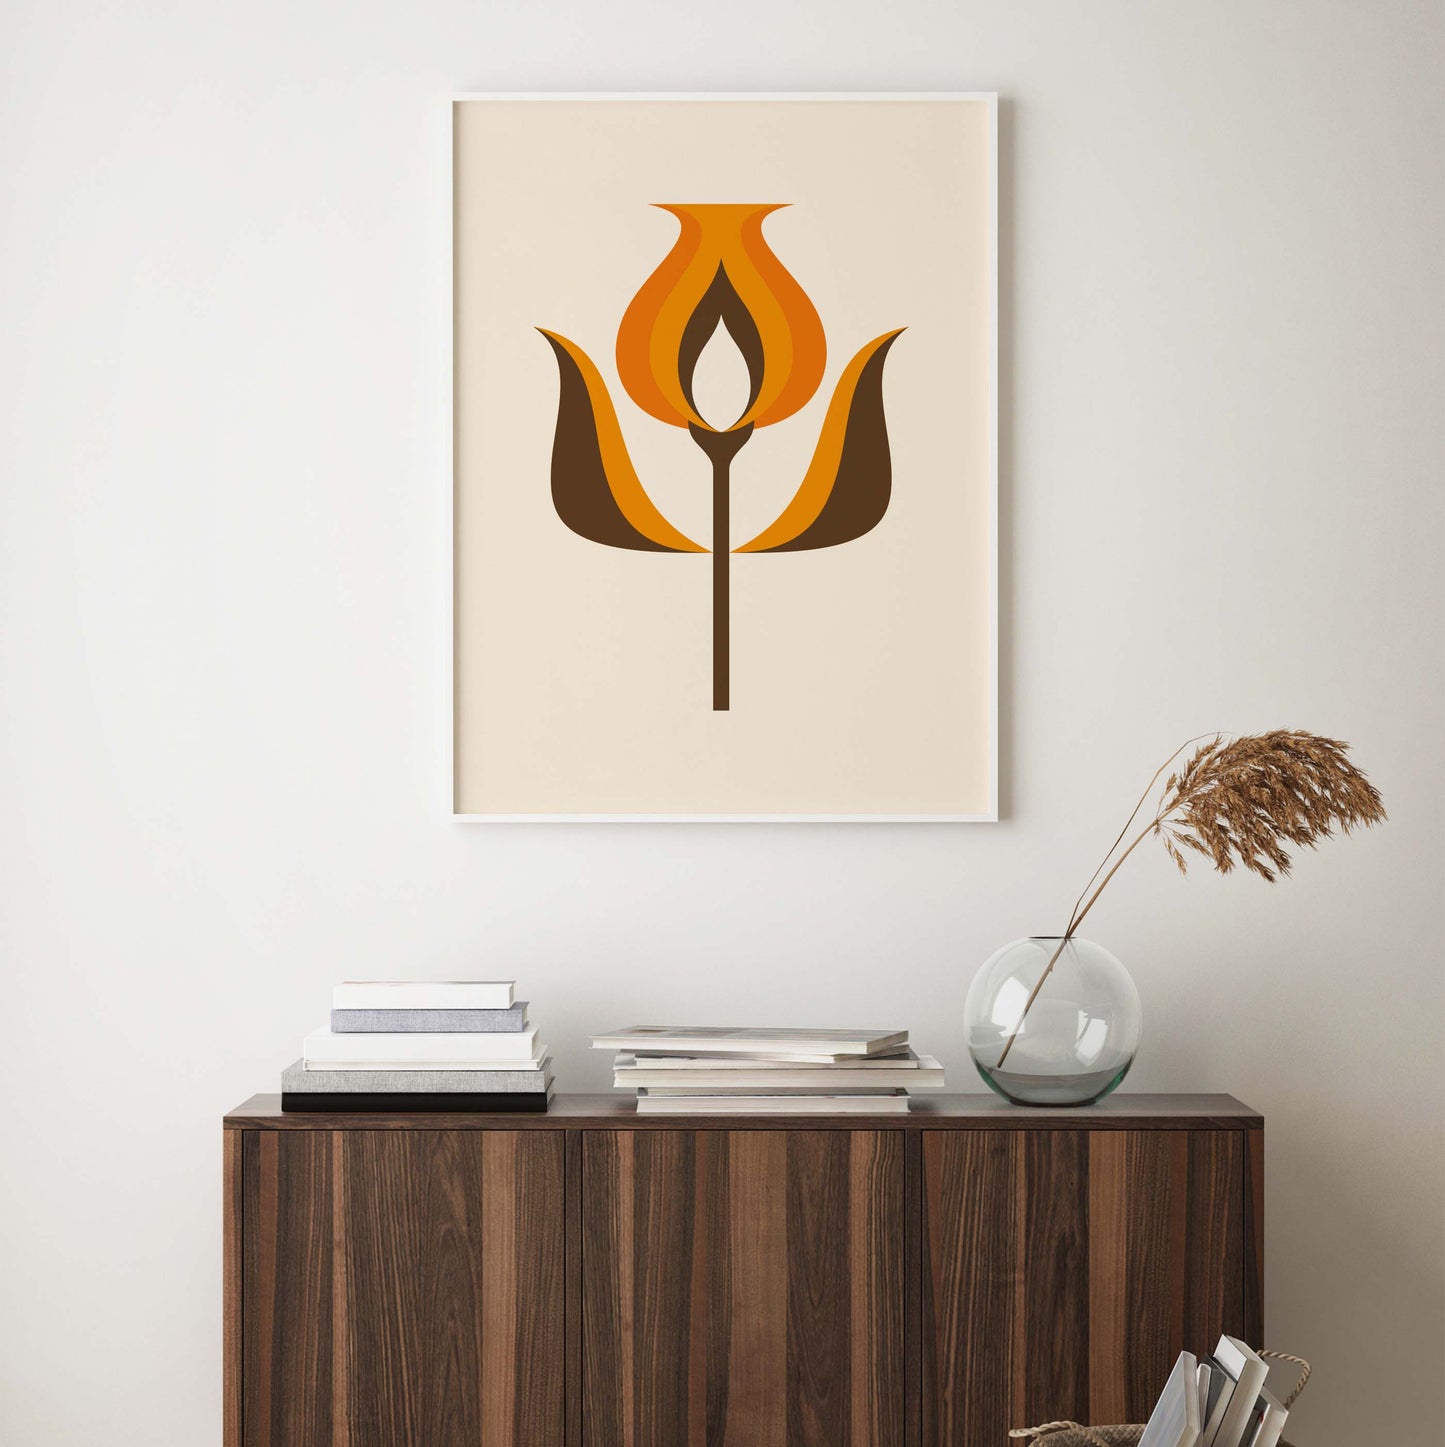 Retro flower poster in orange and brown